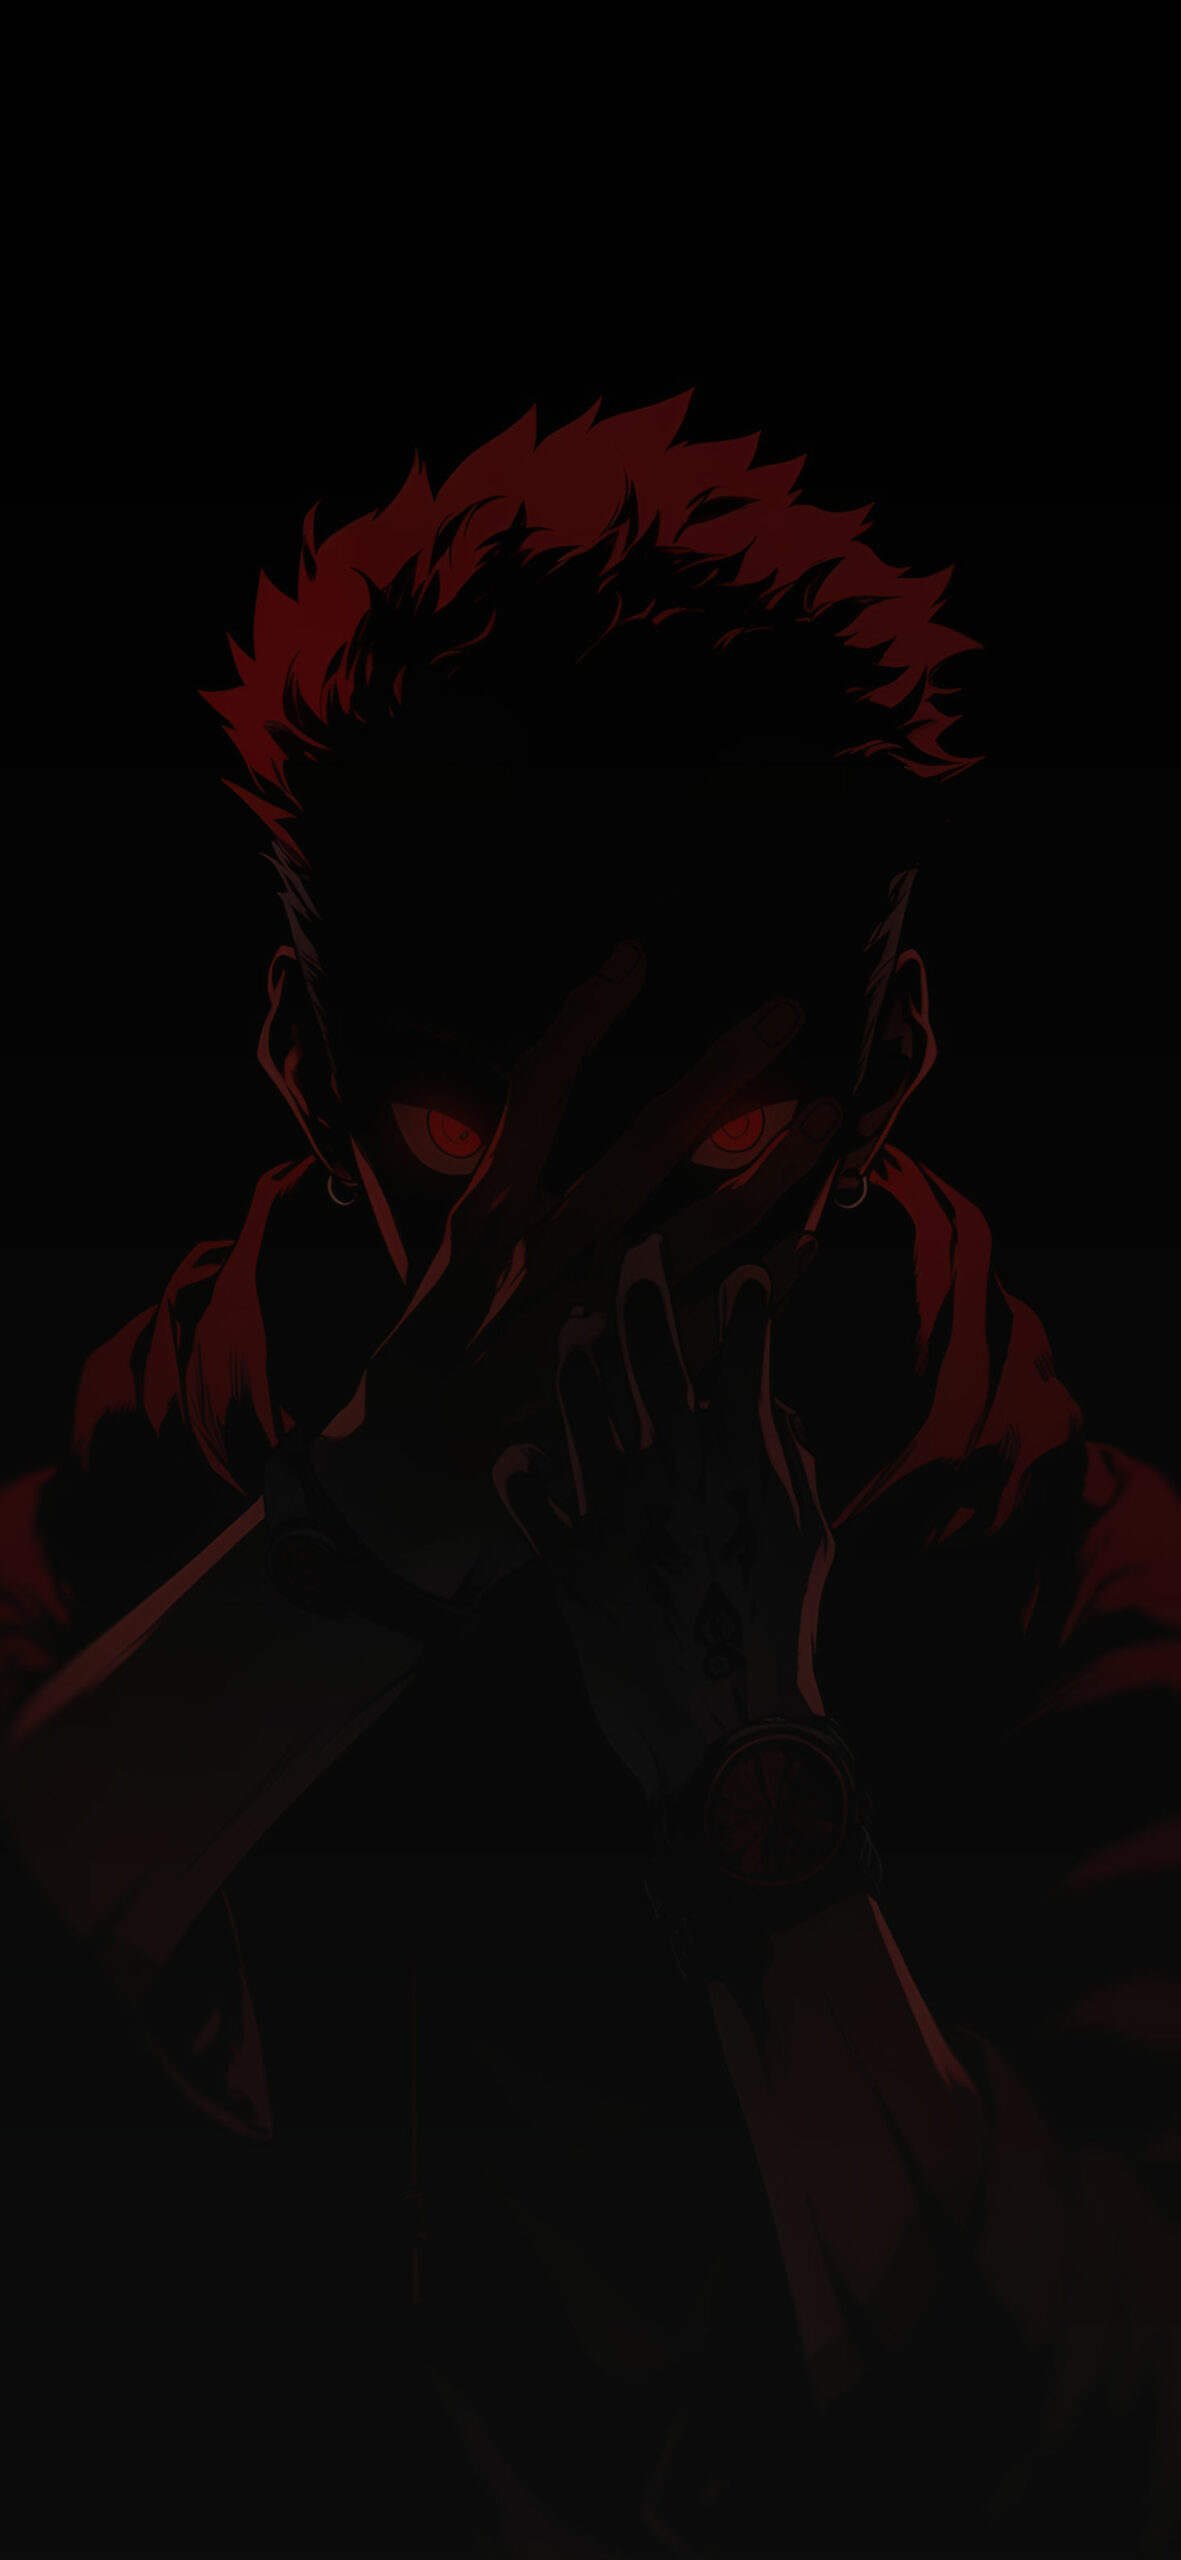 Download A mysterious dark anime boy with style. Wallpaper